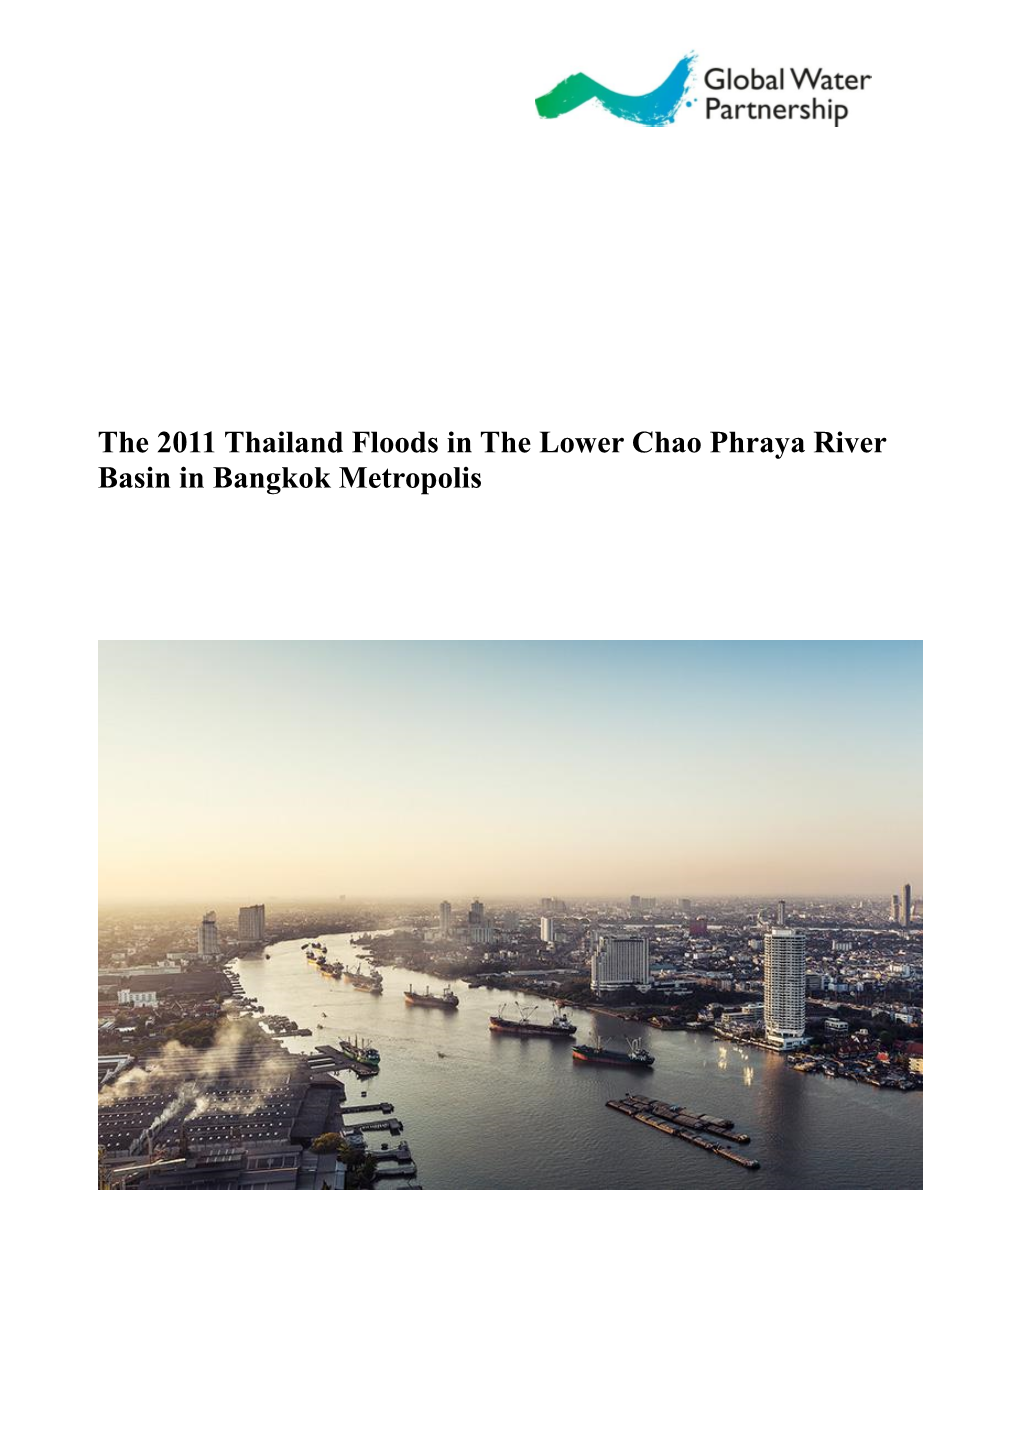 The 2011 Thailand Floods in the Lower Chao Phraya River Basin in Bangkok Metropolis